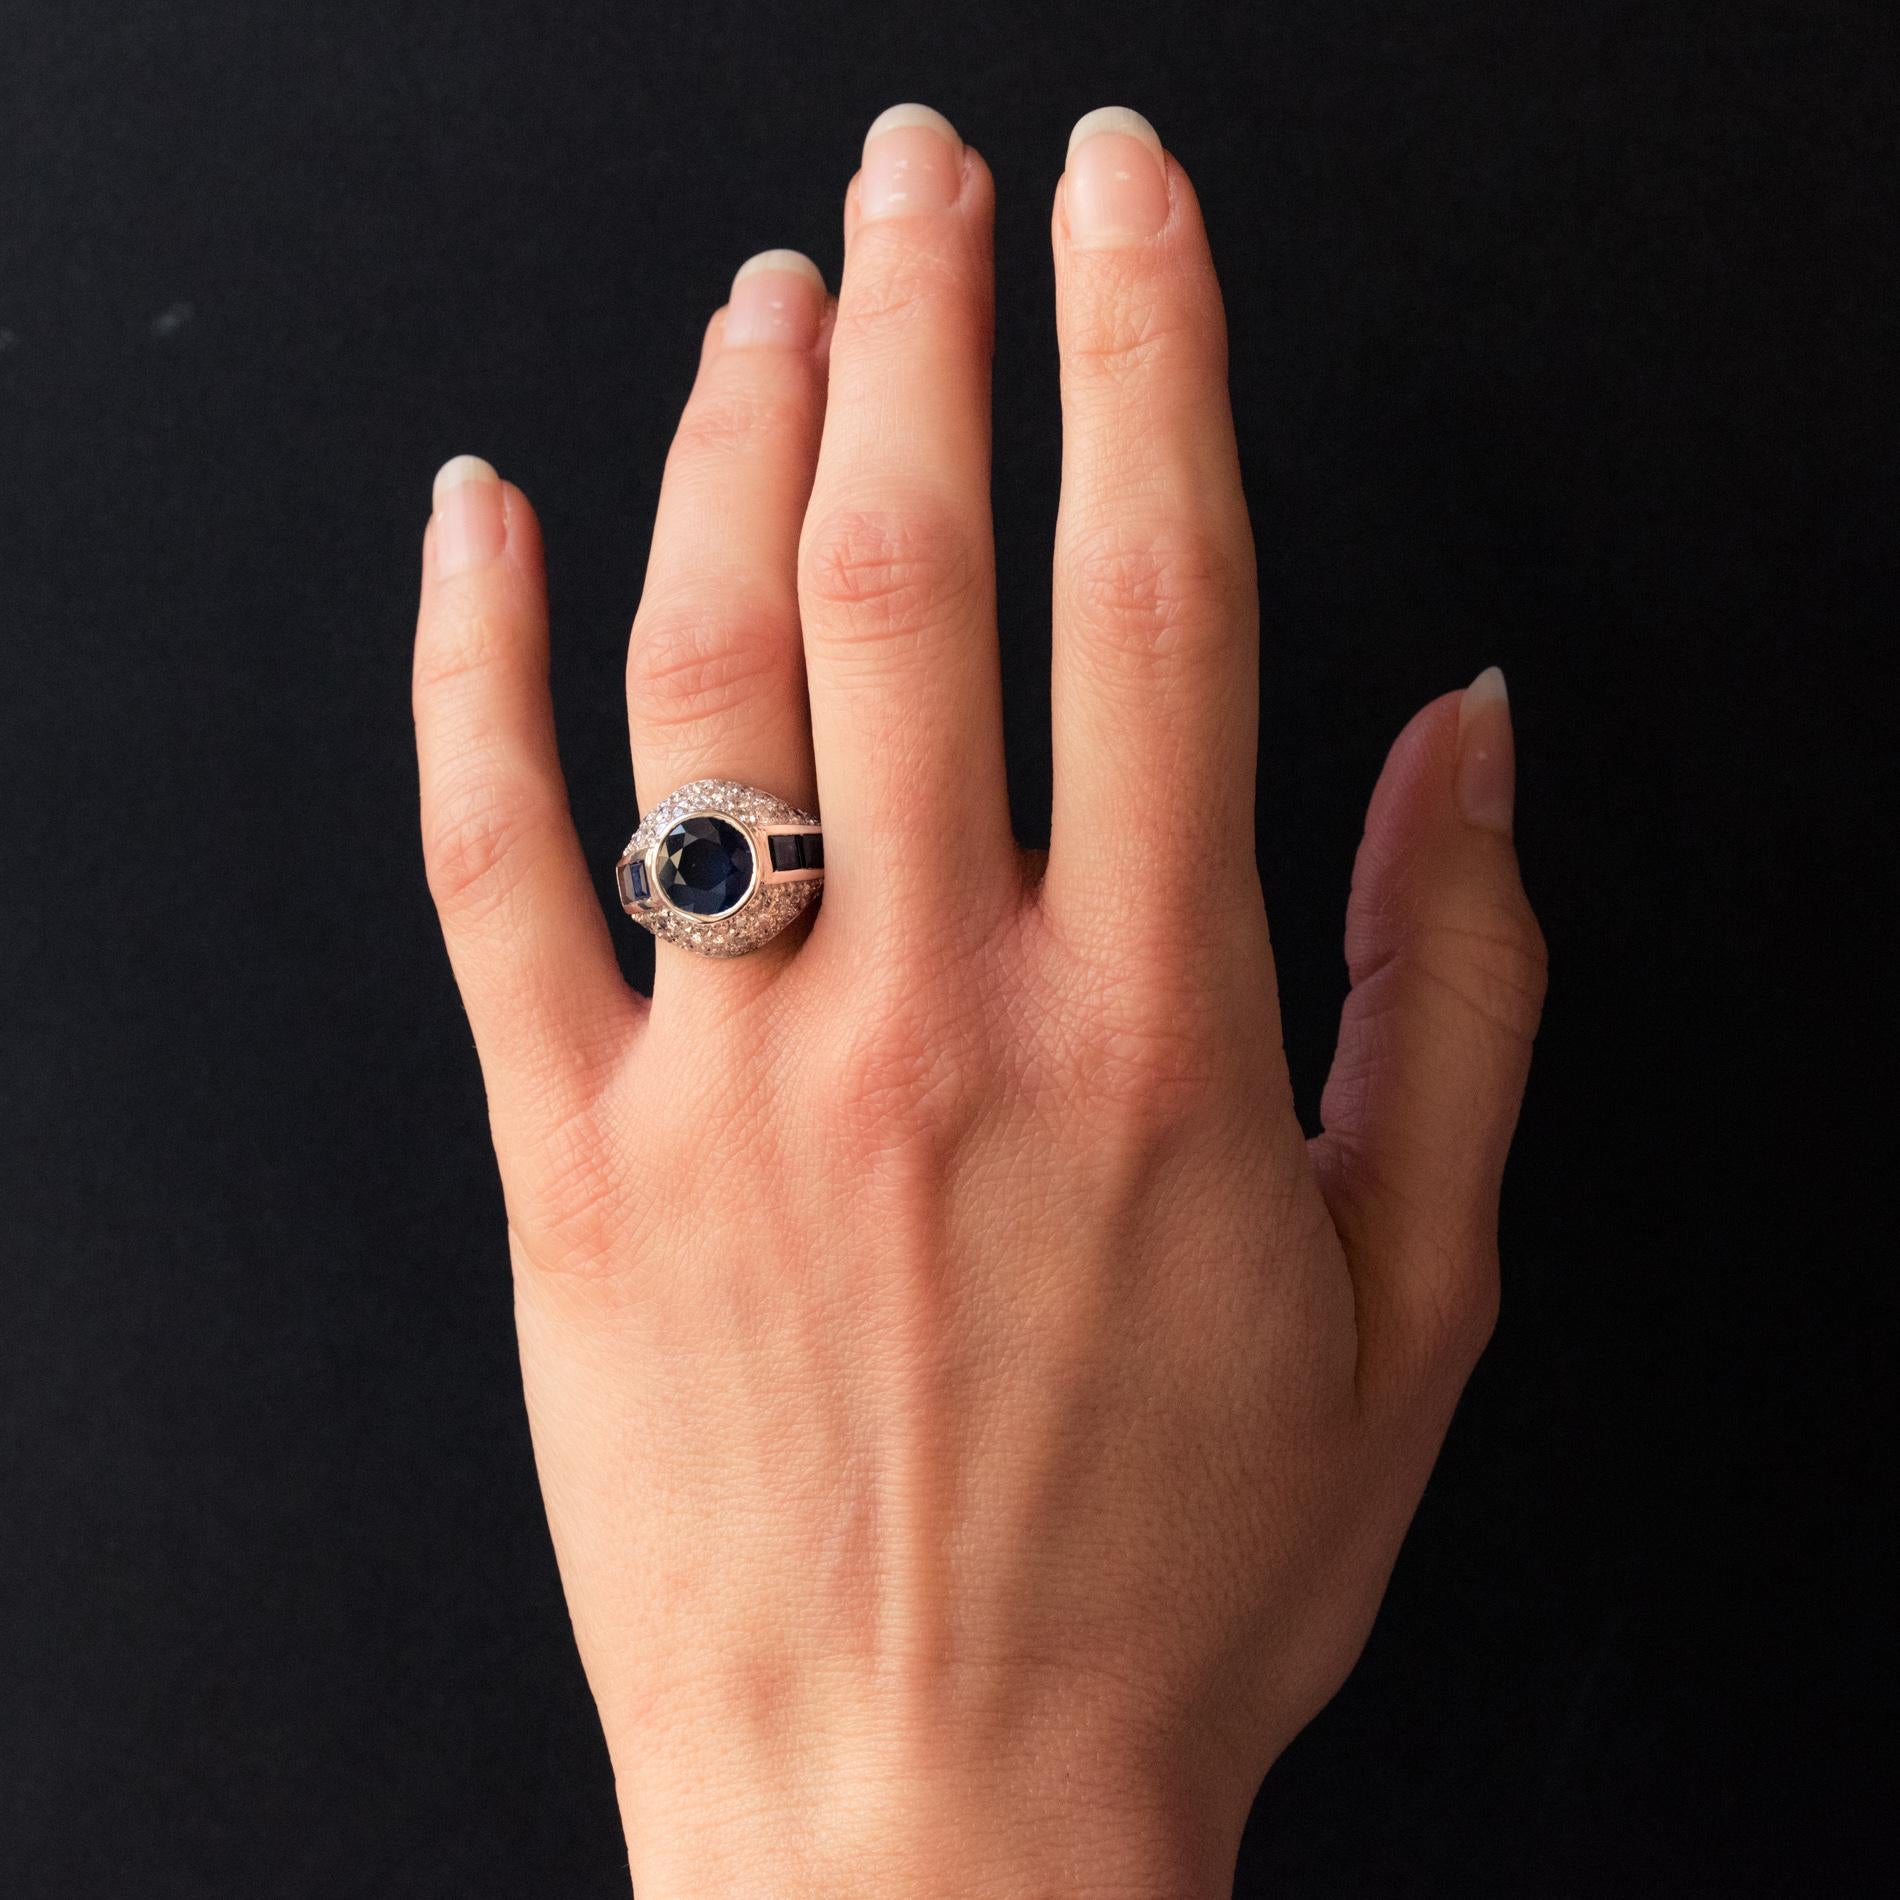 Ring in Platinium and 18 carat yellow gold, dog and eagle heads hallmarks. 

This splendid sapphire and diamond dome style ring features a good sized bezel set round sapphire of a deep blue. This is accentuated by 2 square sapphires at each side,